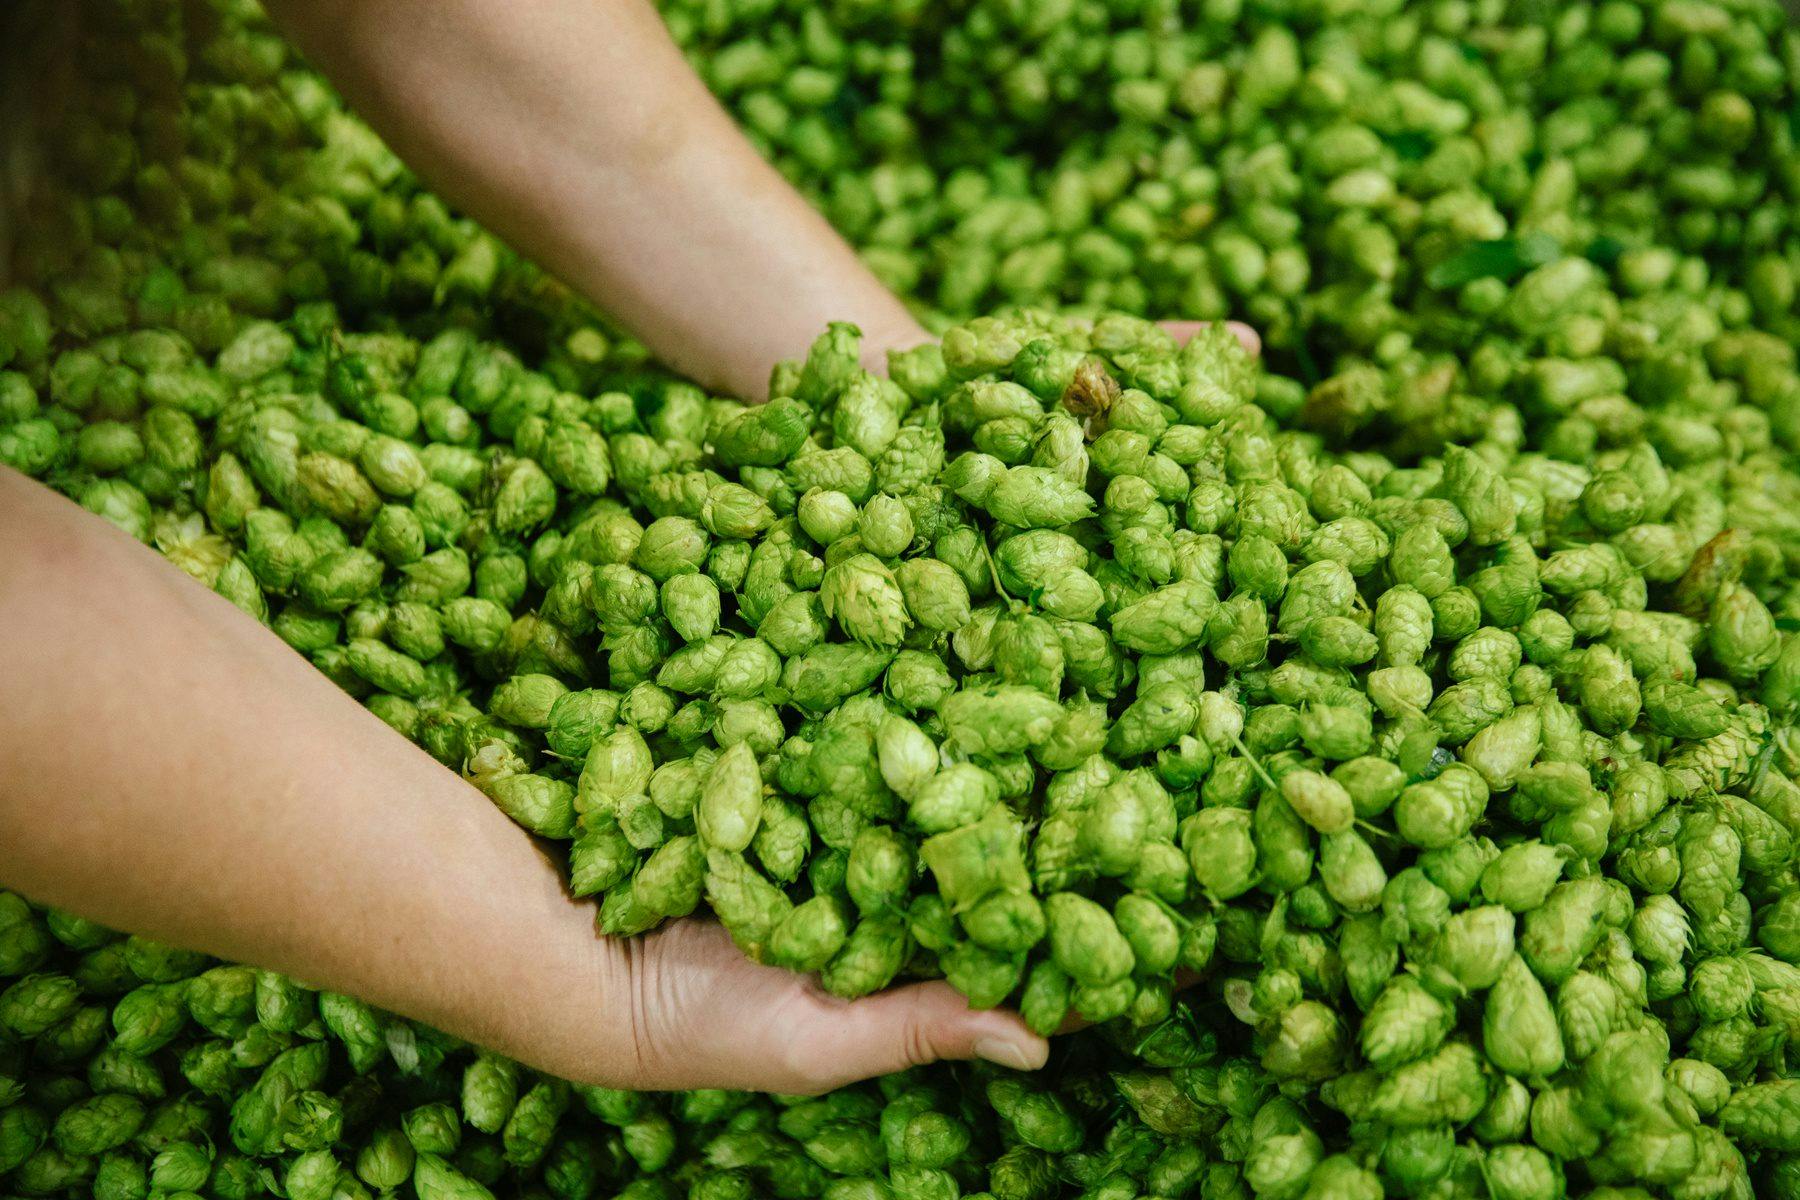 Two hands reaching into a large pile of freshly harvested hops at Sierra Nevada